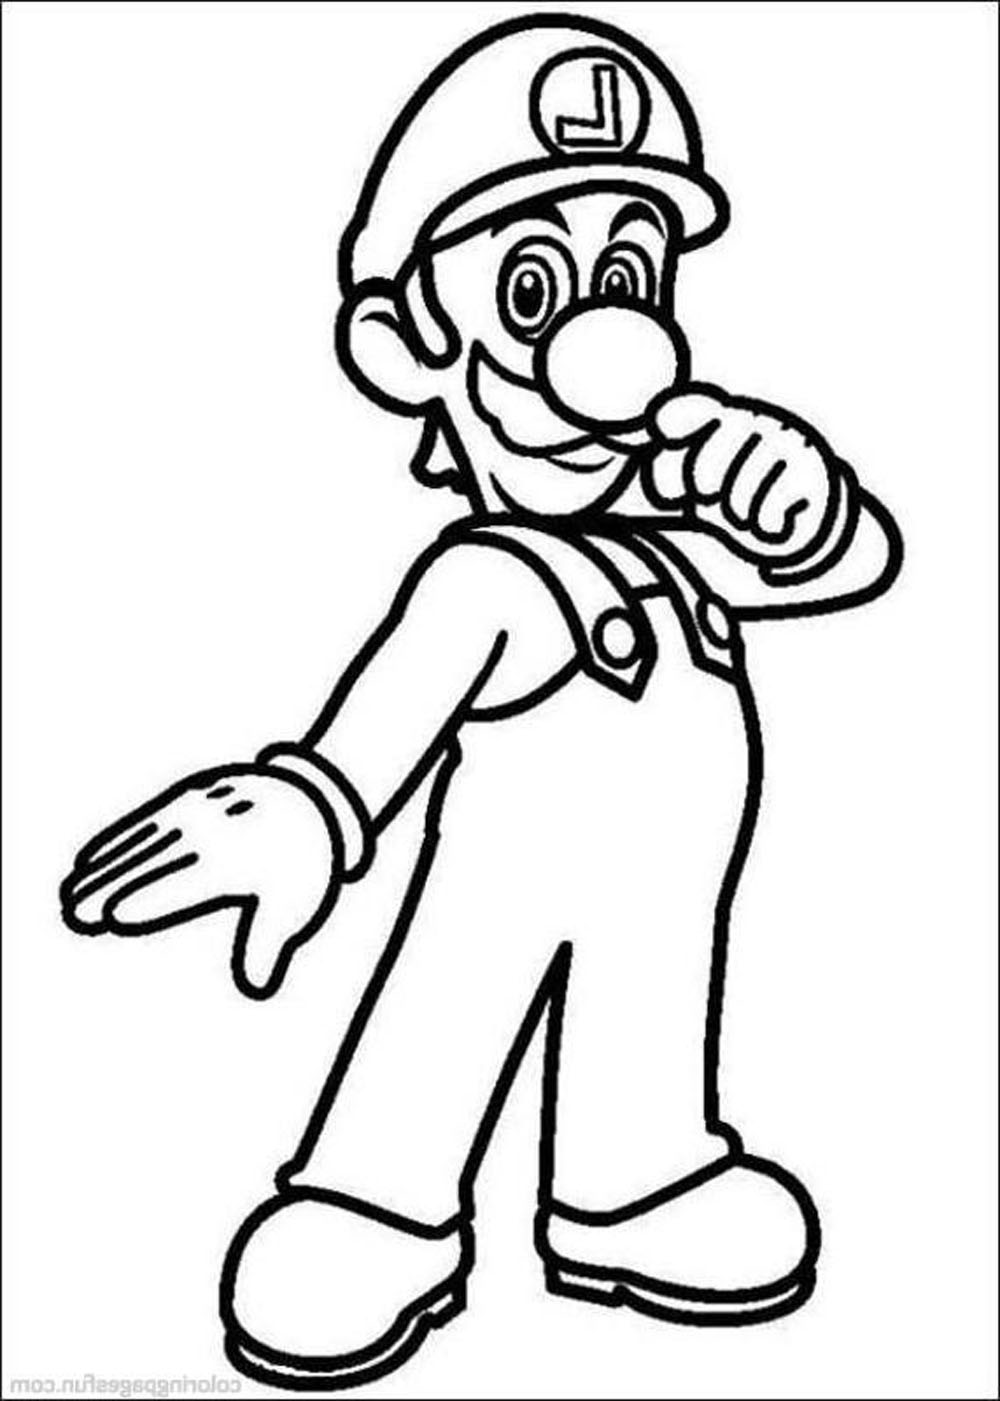 mario coloring pages to print